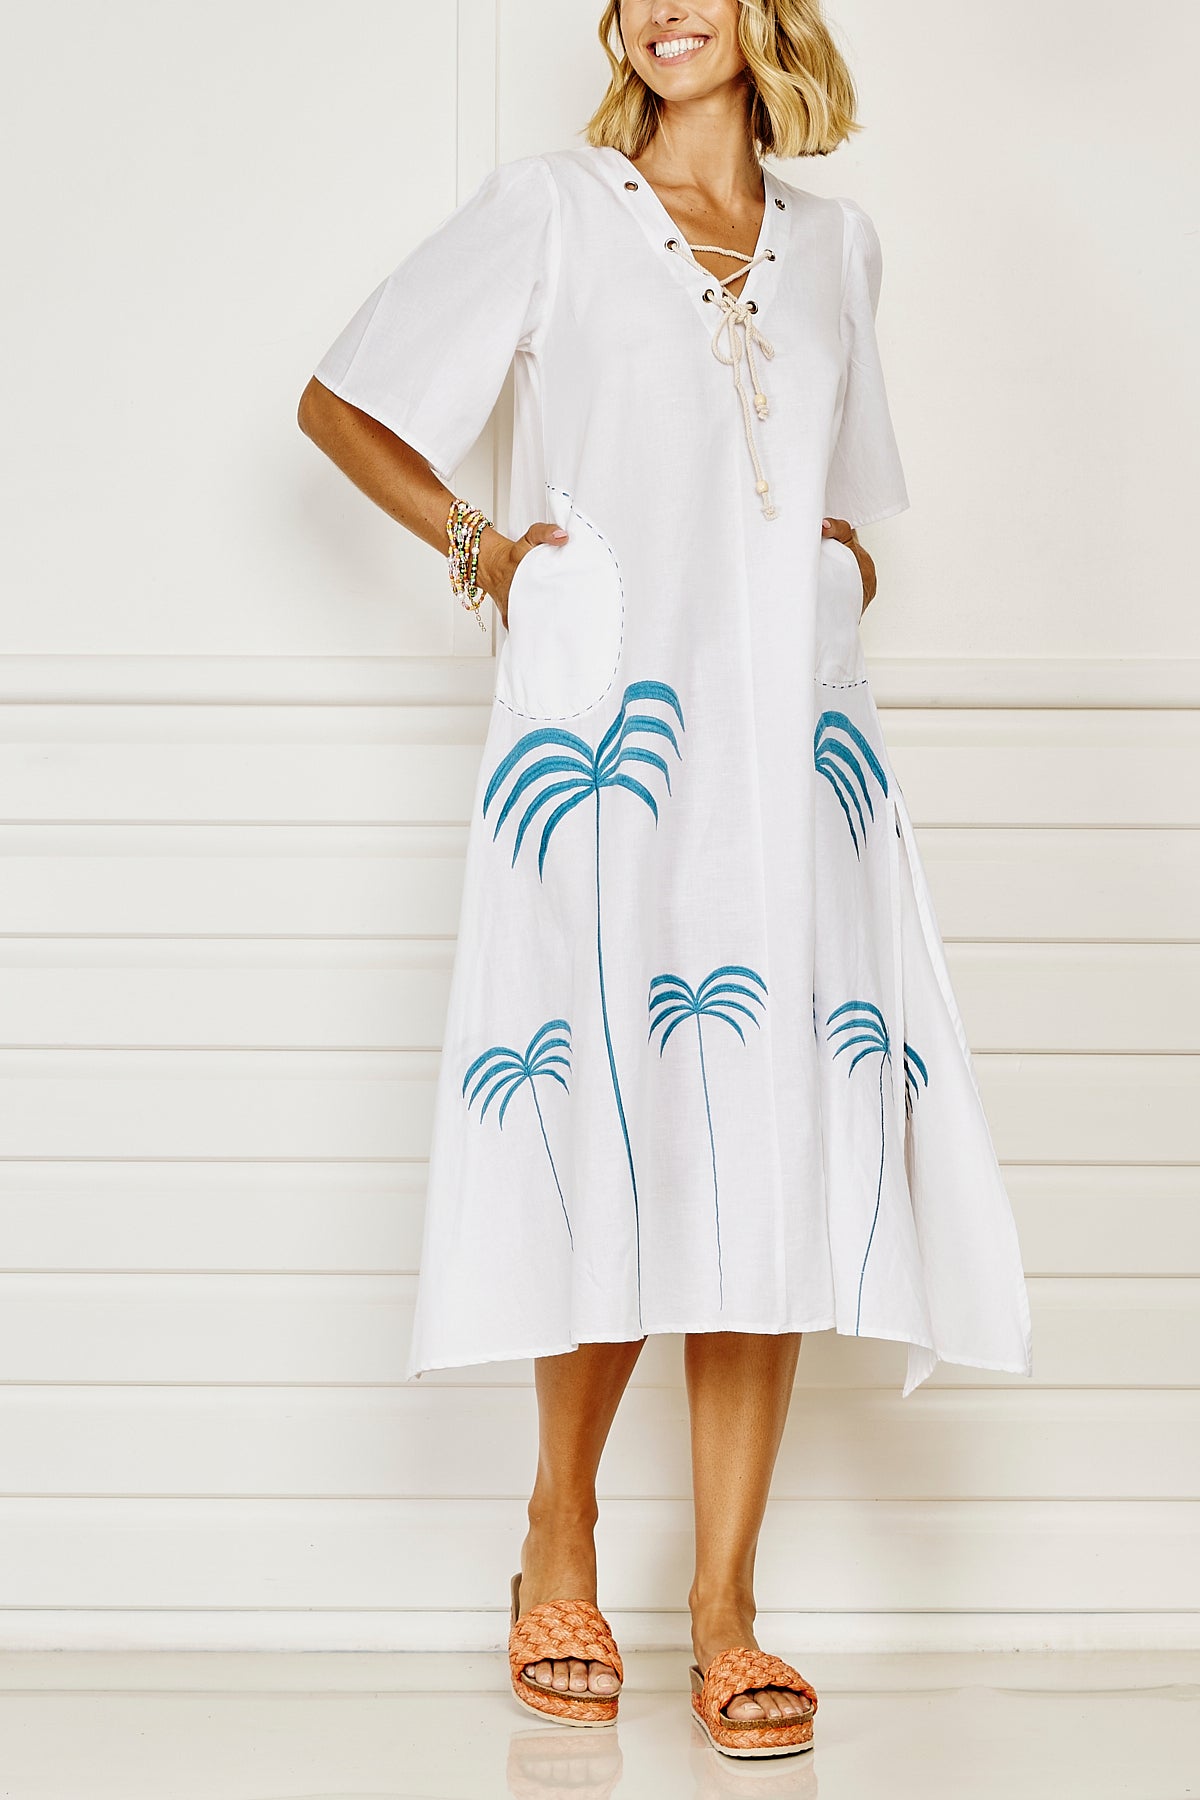 Barbados Maxi Dress - White with Blue Embroidery